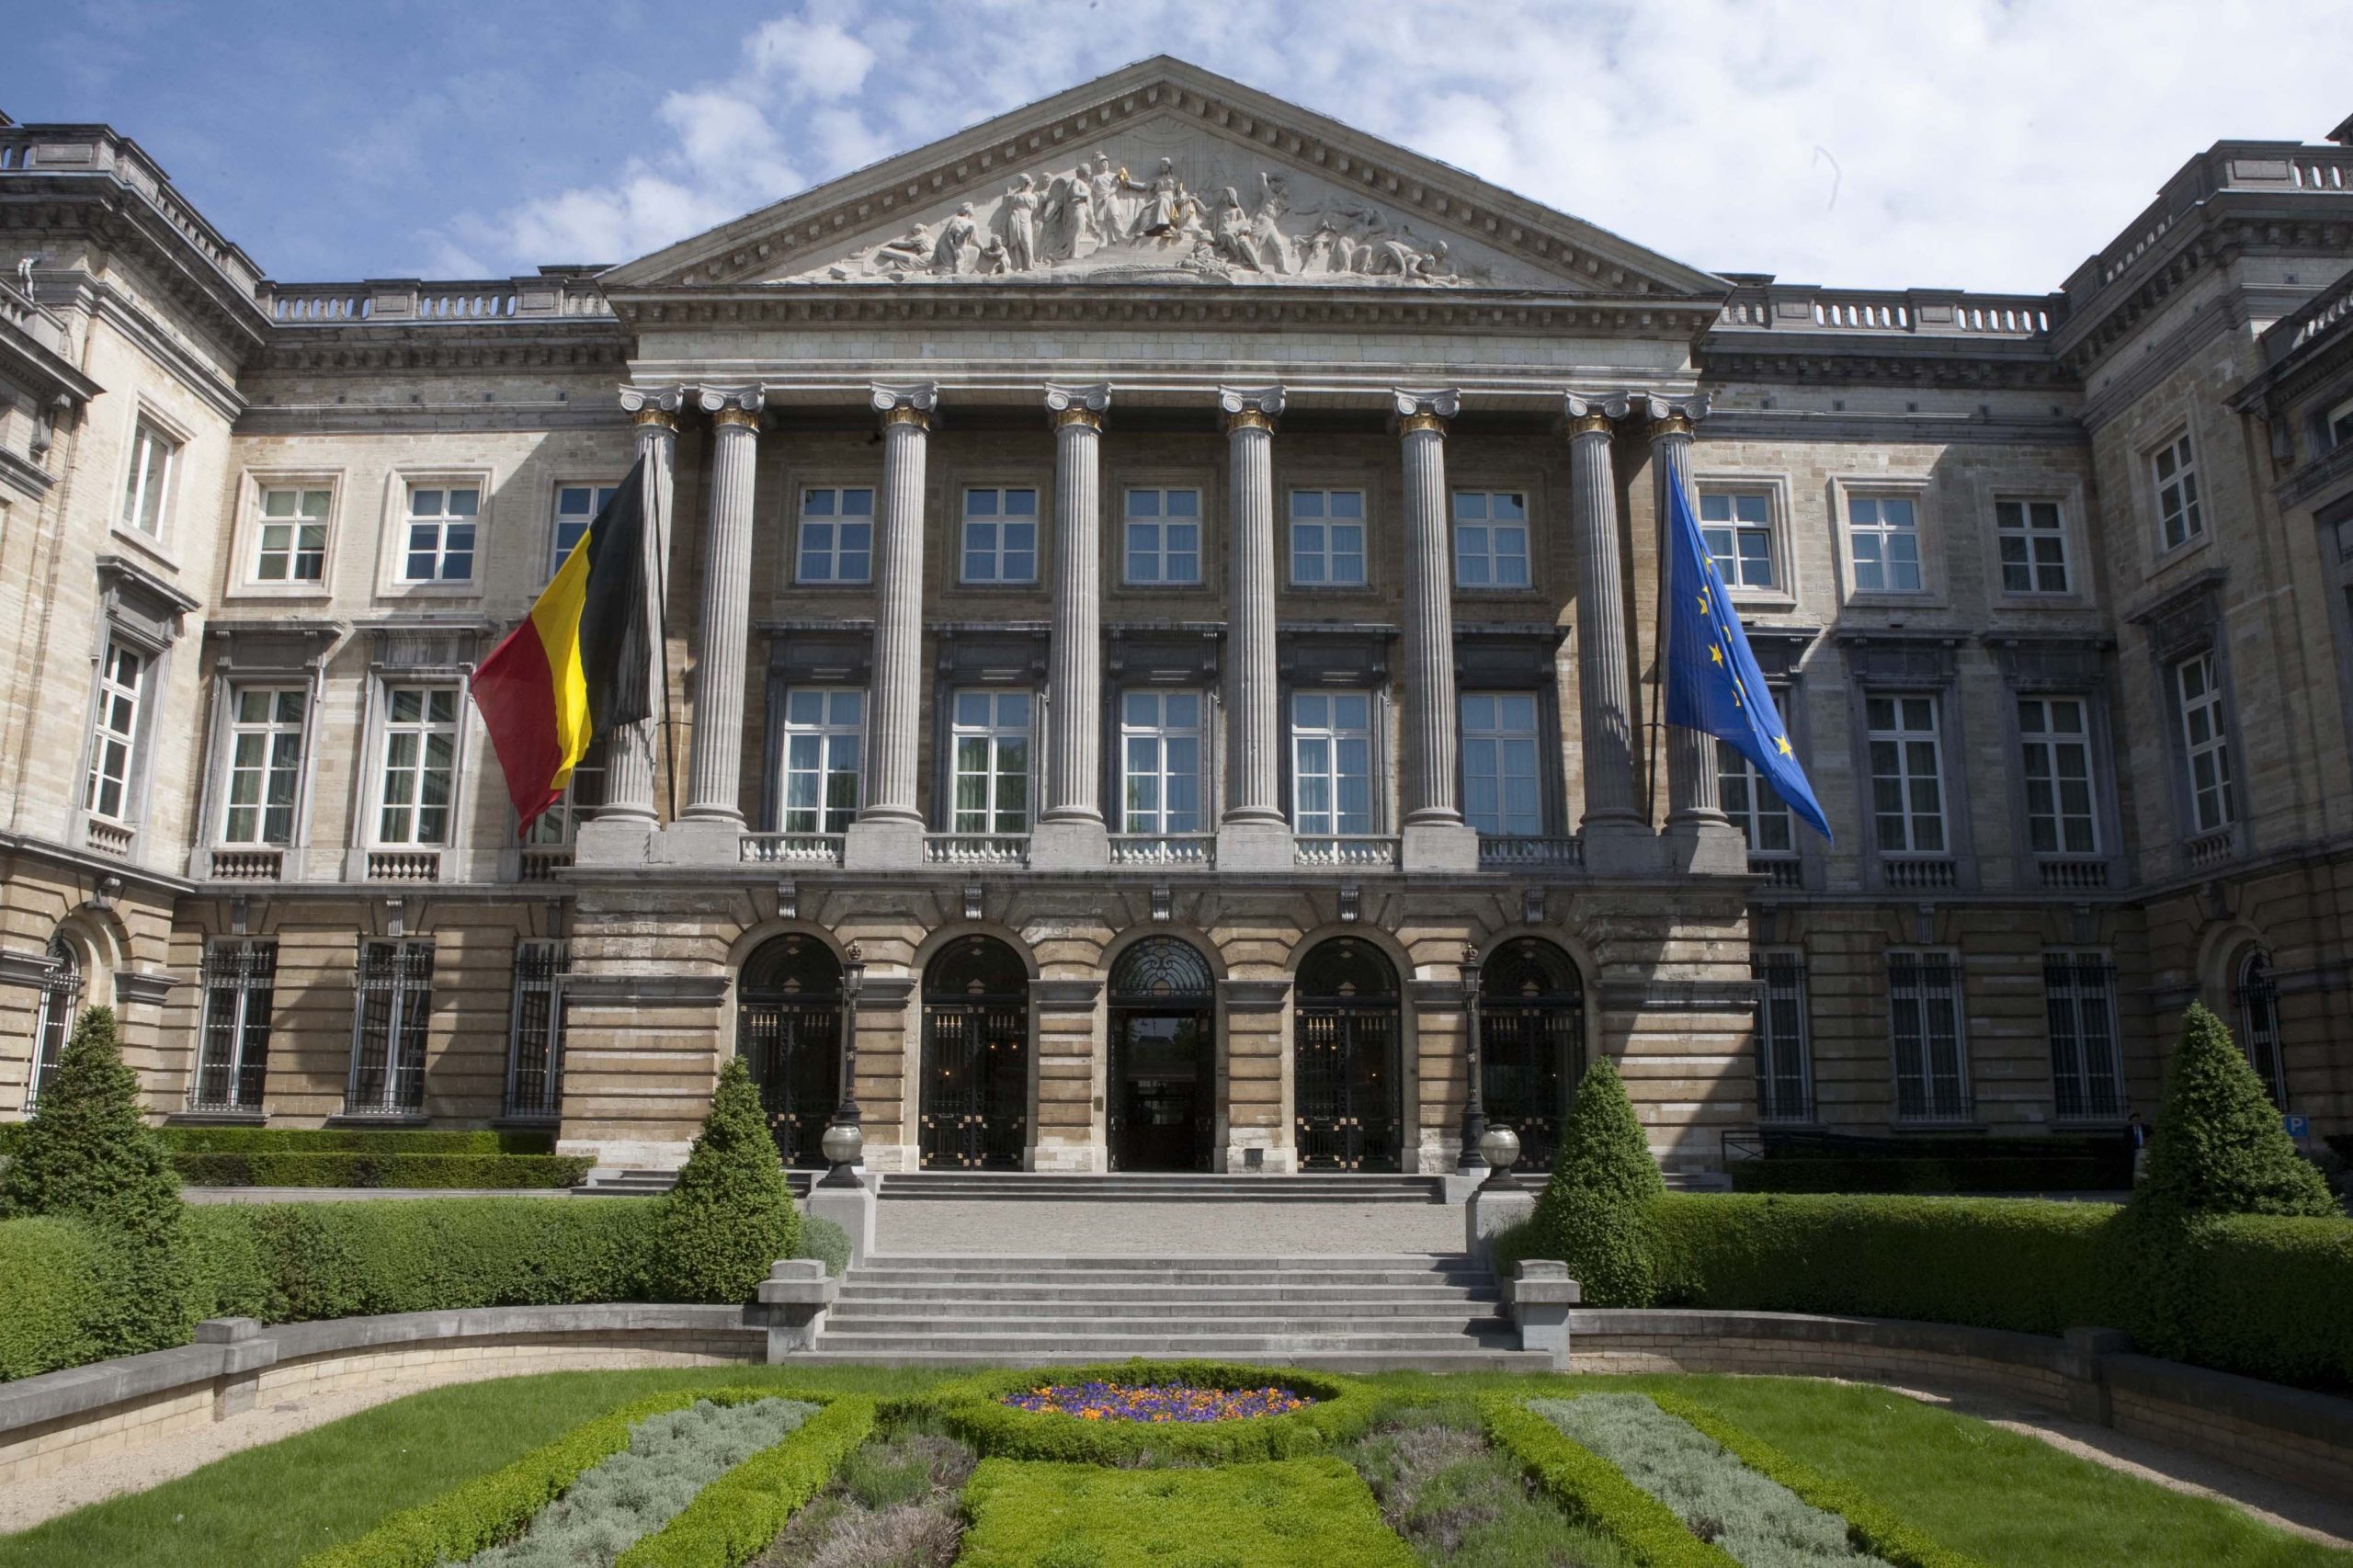 A picture of the Royal palace of Brussels with the Belgian flag and the EU flag.